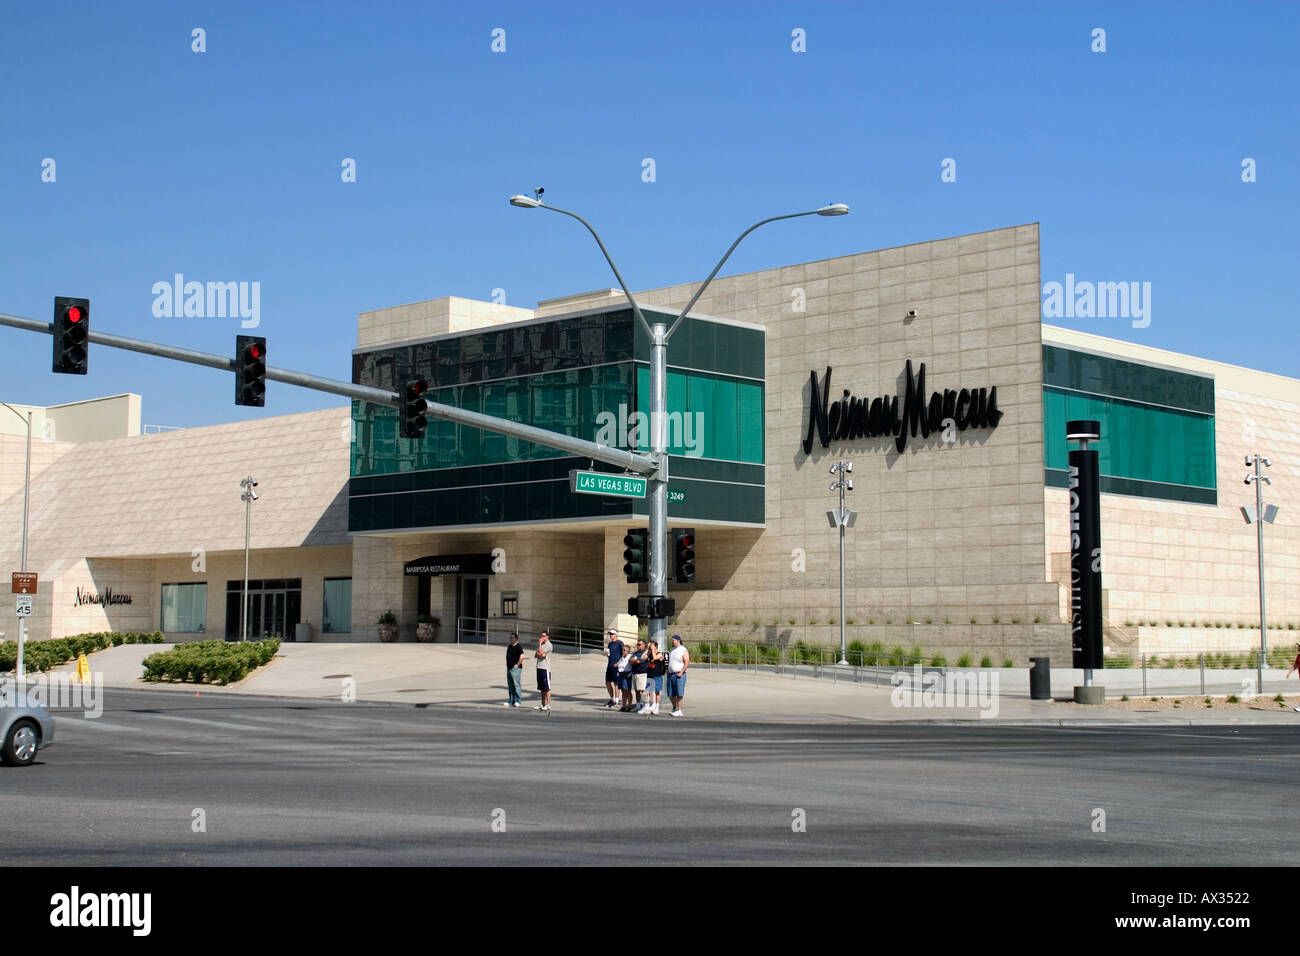 Neiman Marcus in Las Vegas News Photo - Getty Images